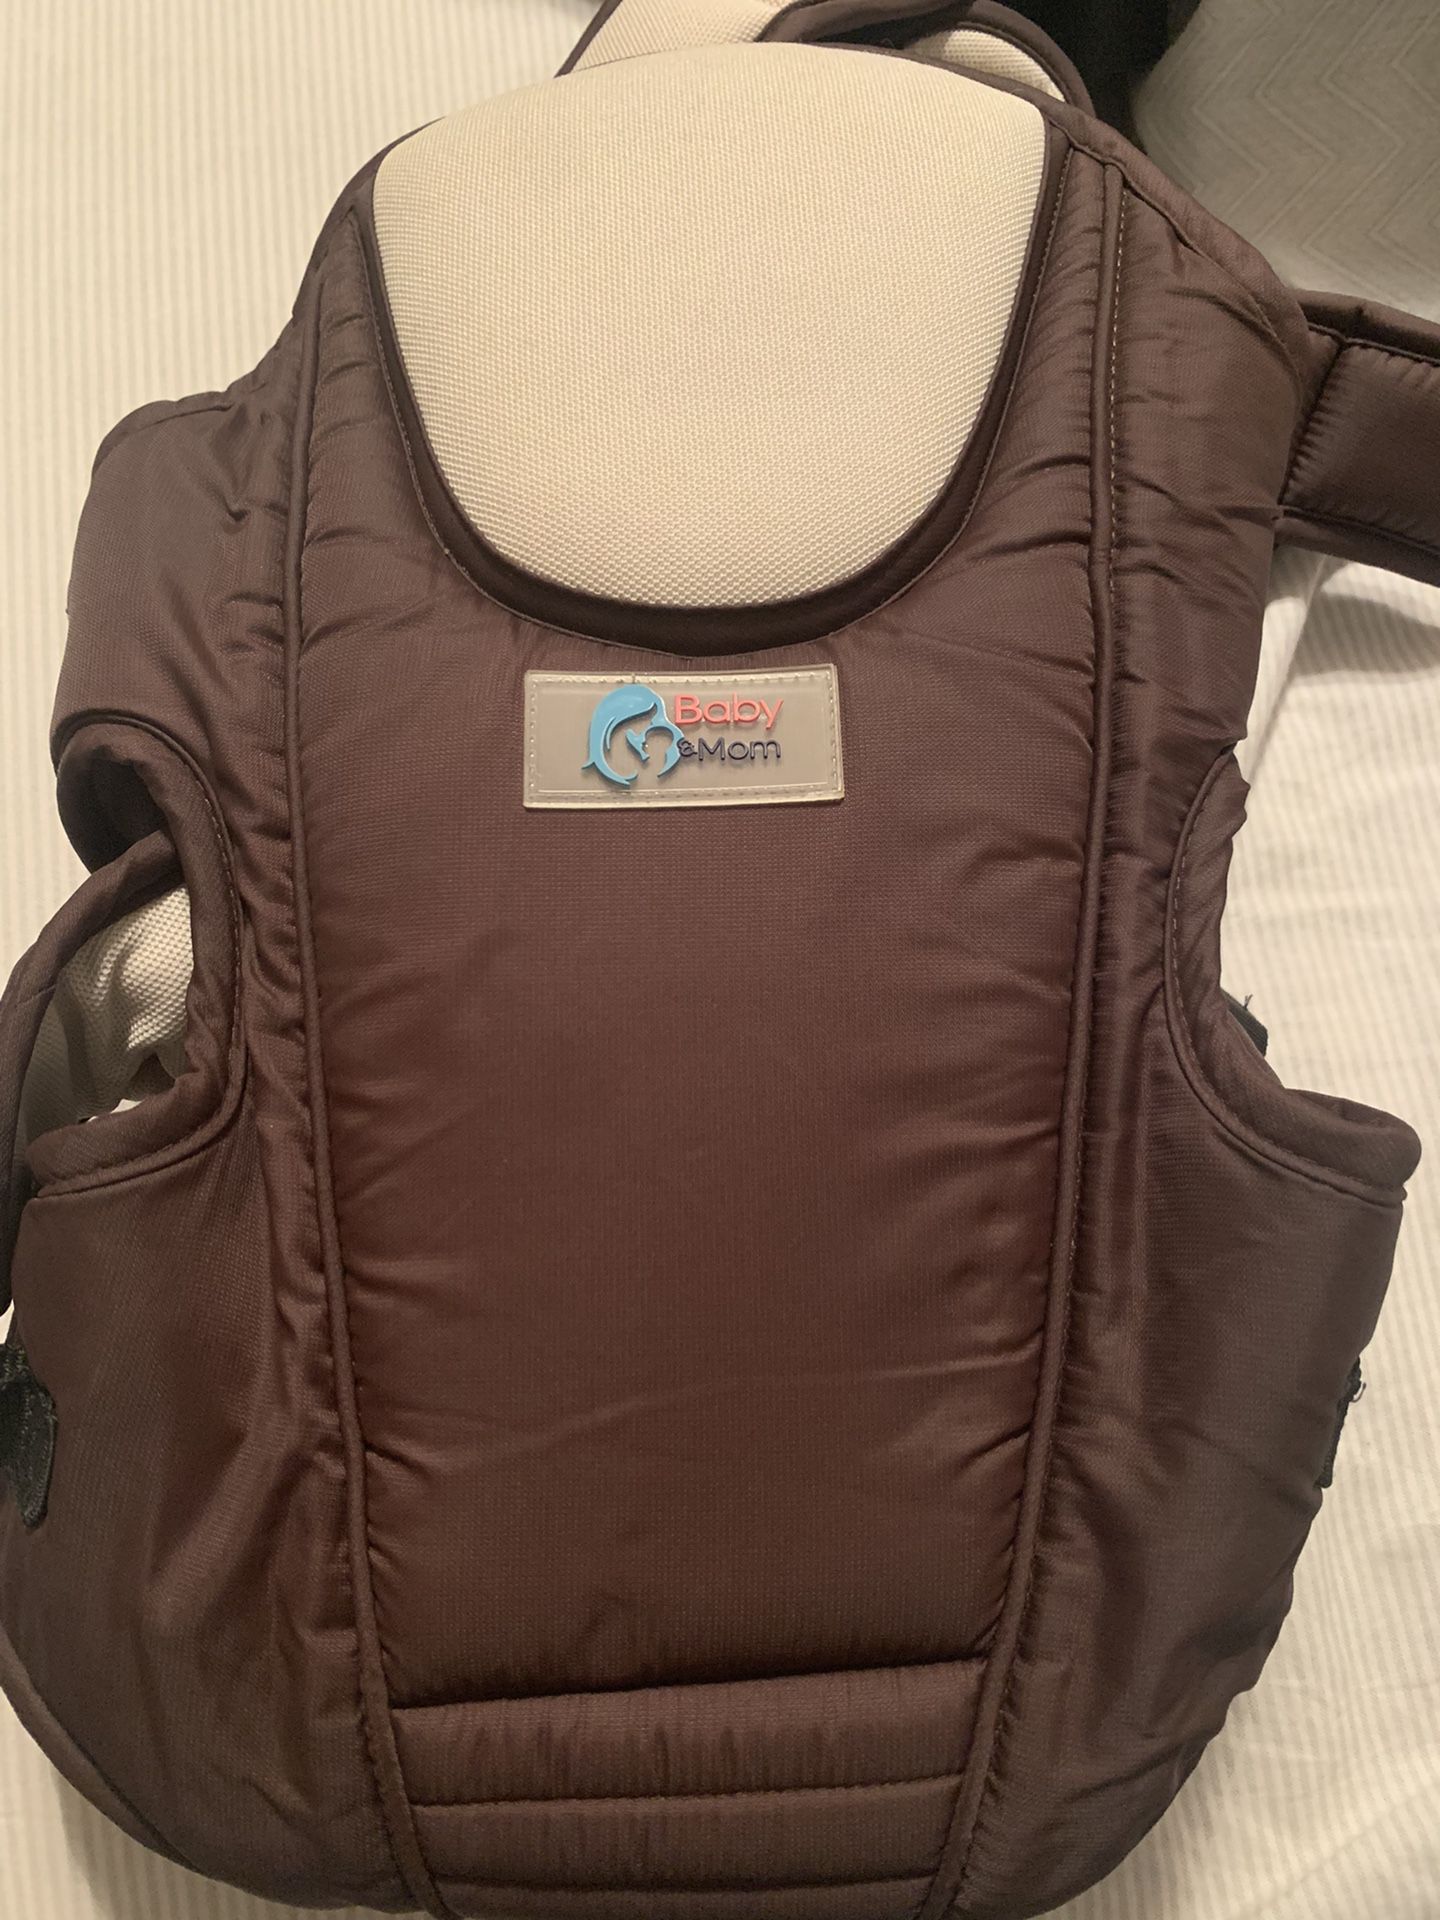 Baby & Mom Baby Carrier